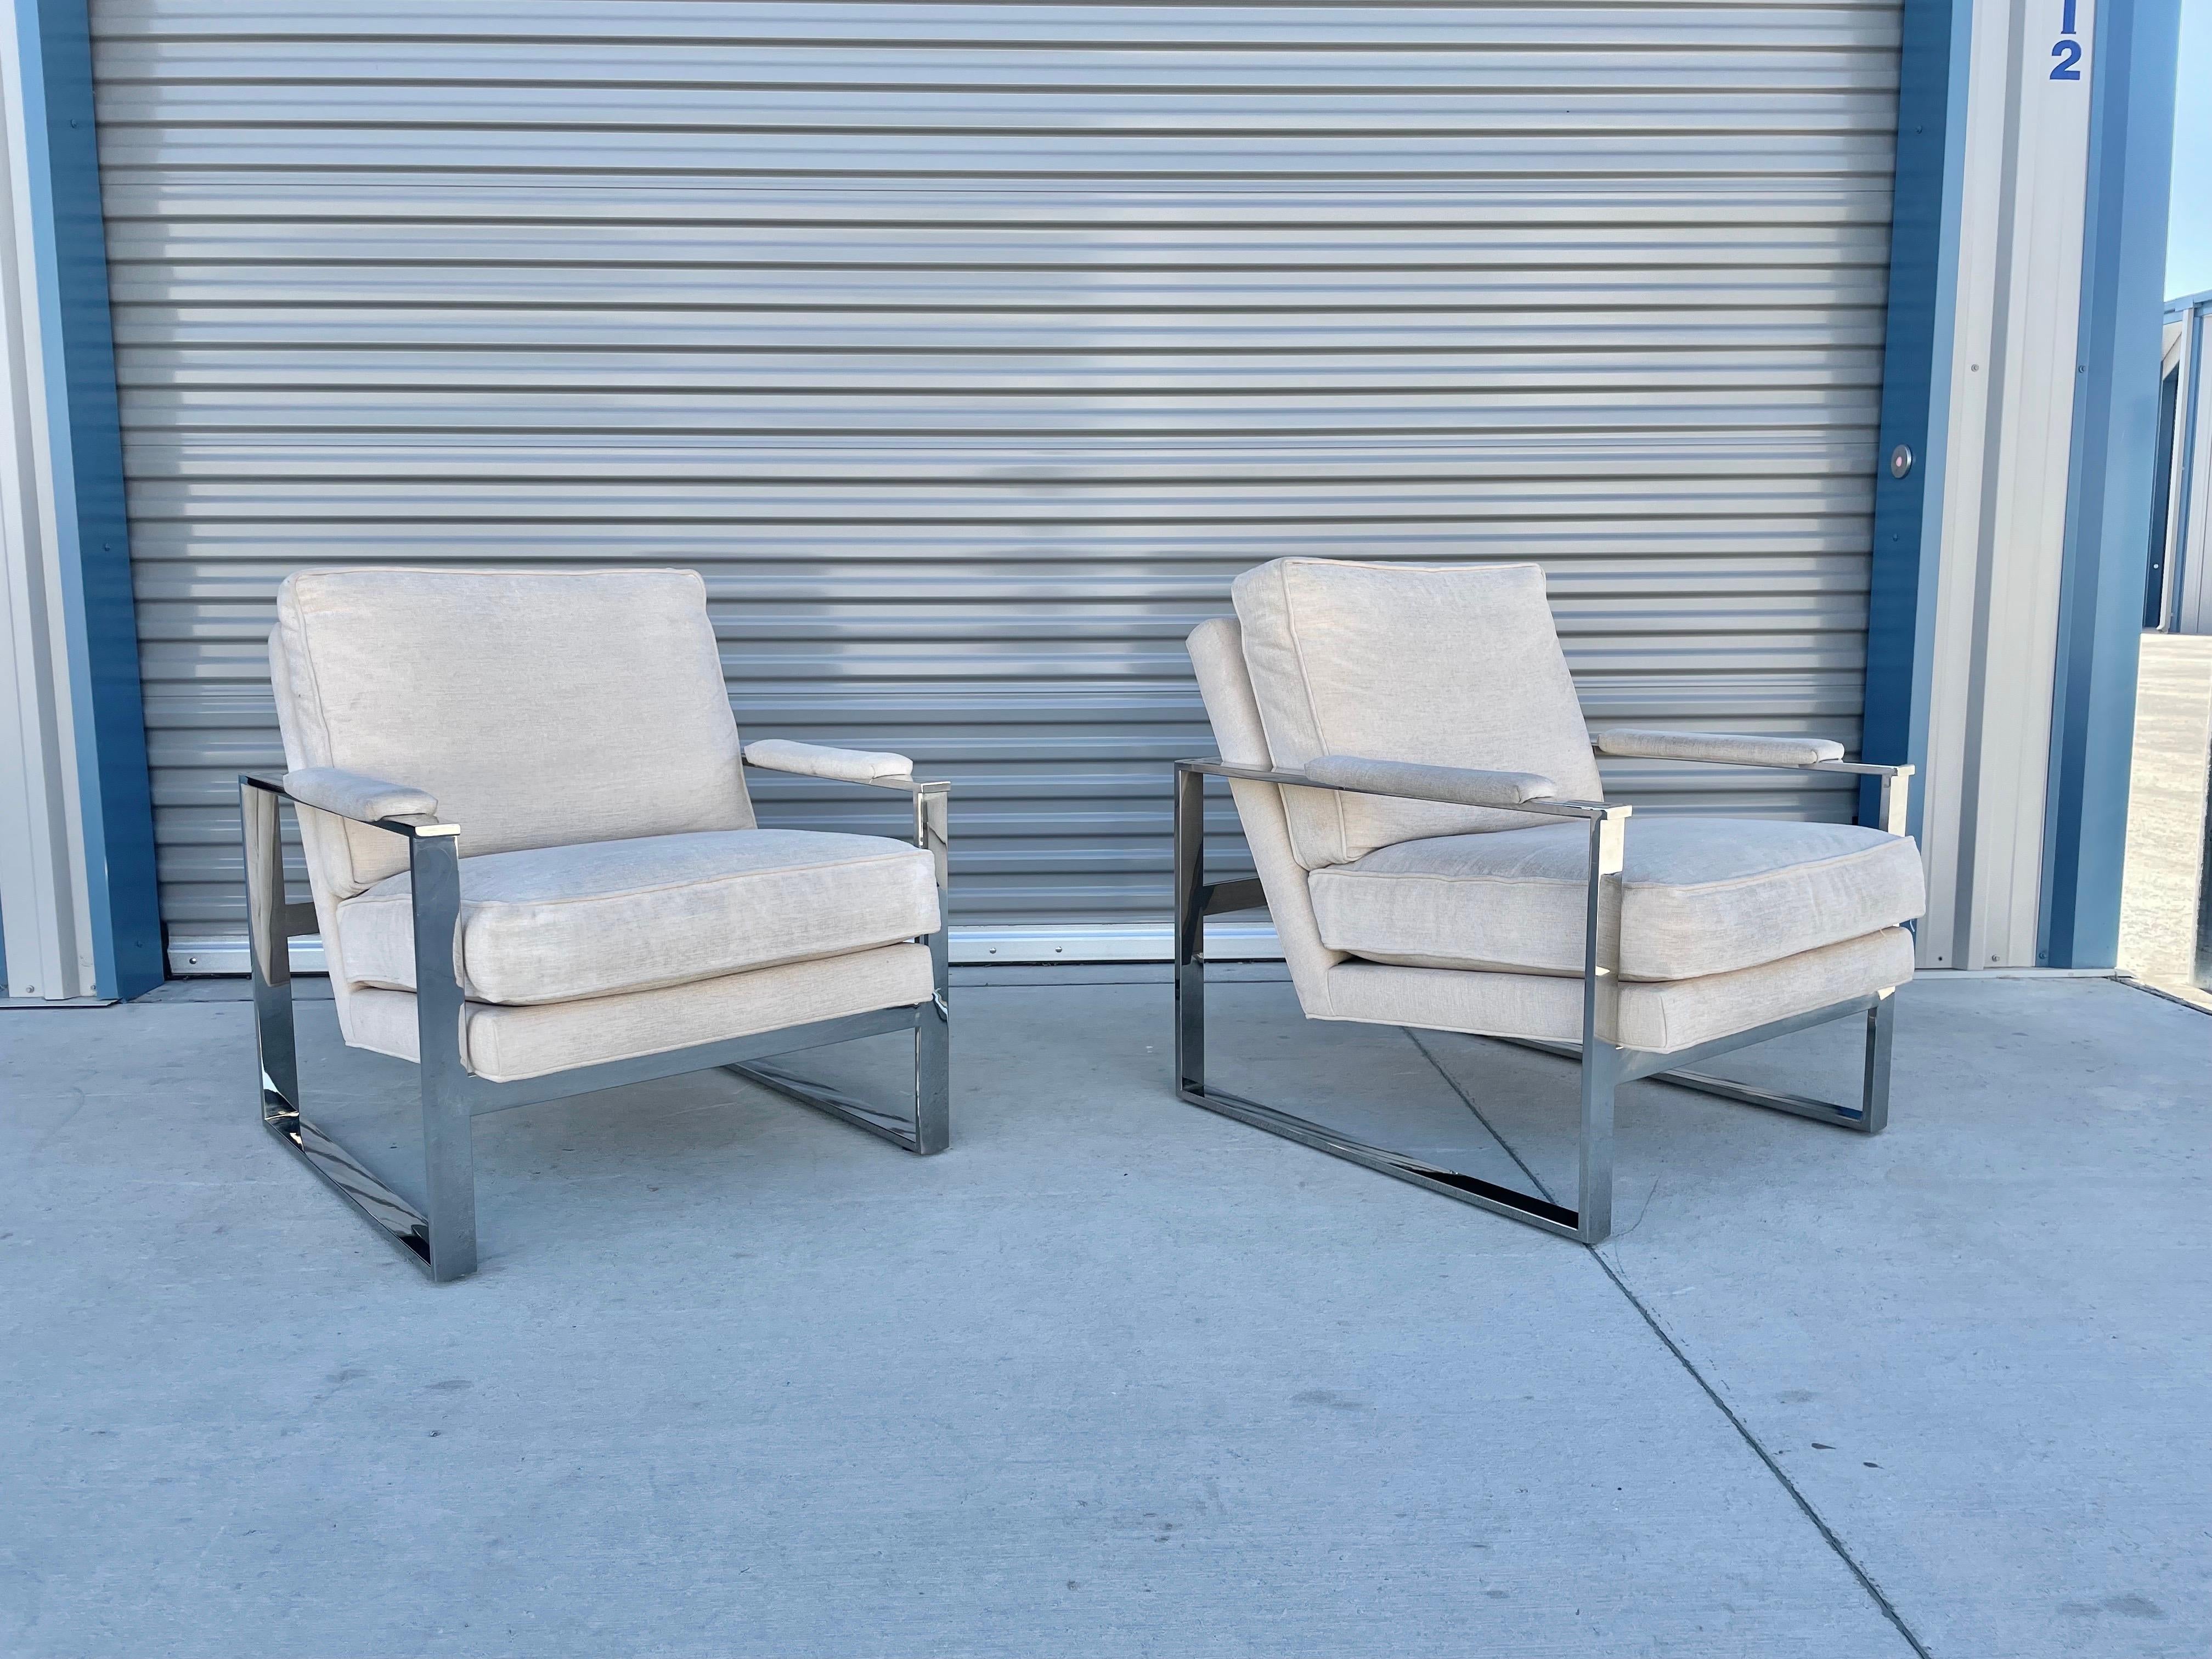 Midcentury chrome lounge chairs were designed by Milo Baughman for Thayer Coggin. These beautiful pair of chairs feature a heavy chrome base with a white upholstery that does have a bit of age to it but can be use as-is, or you can have them